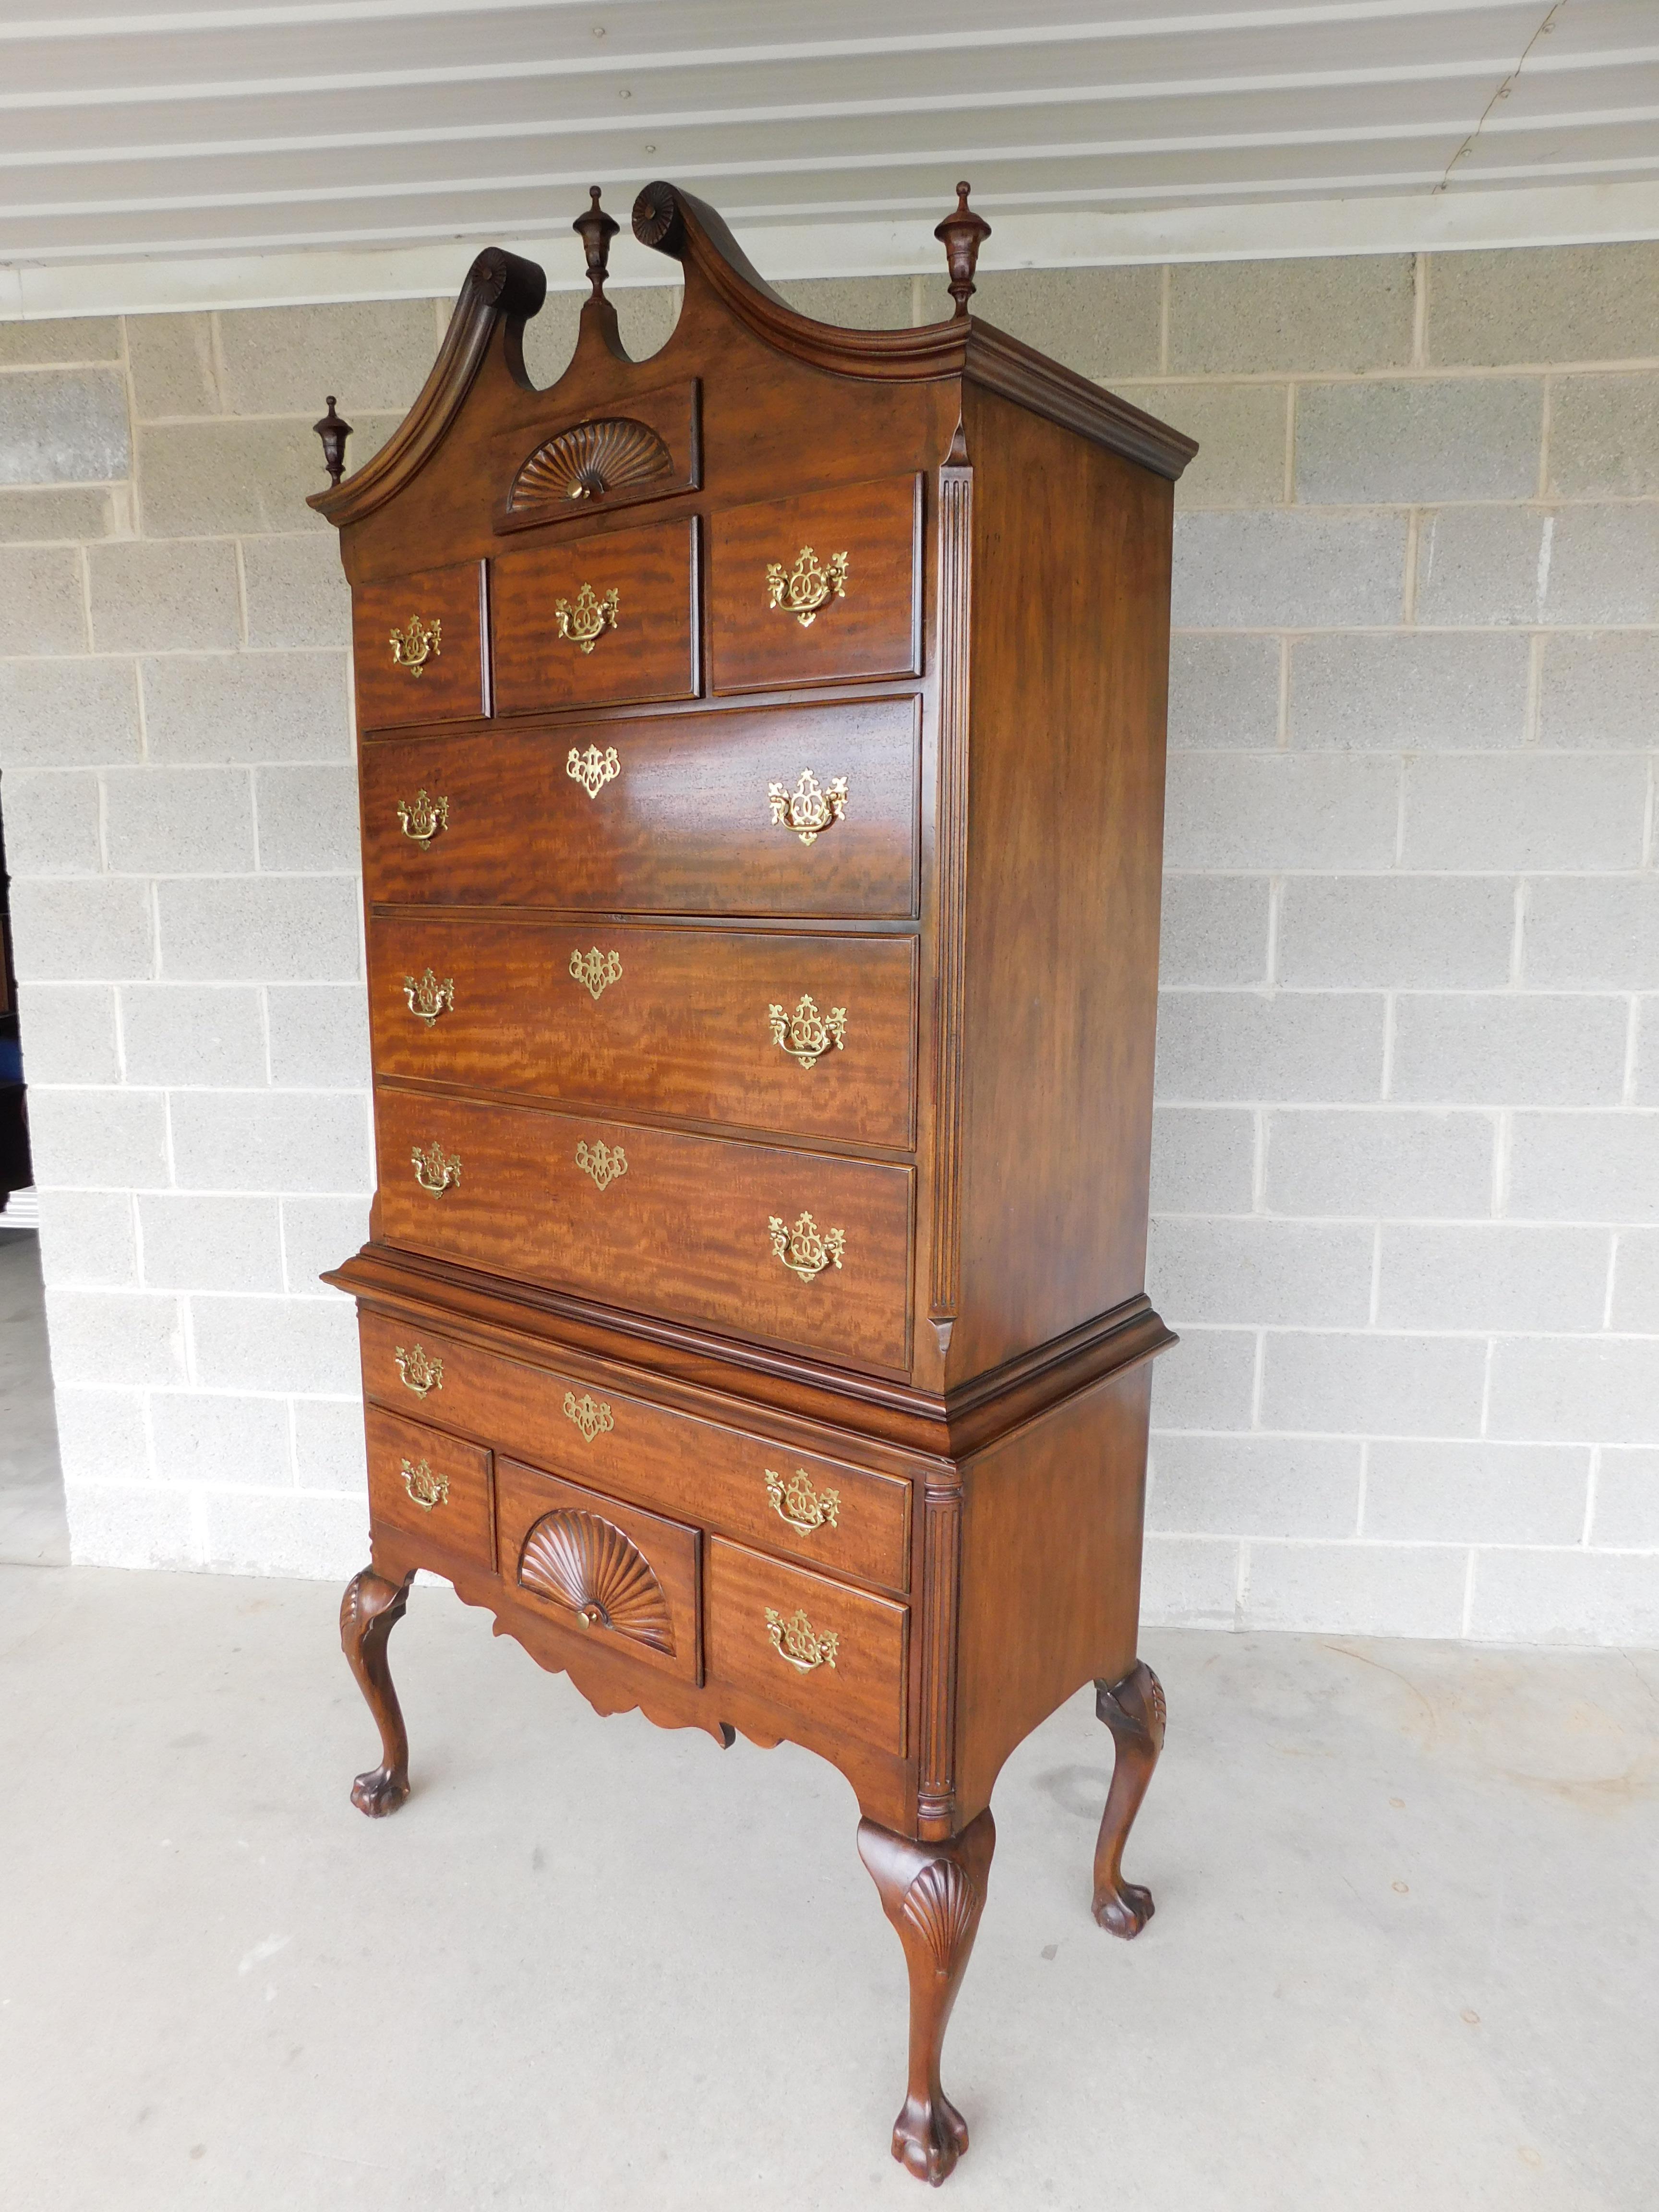 Chippendale style, broken arch top with pediment center, and 2 finials flank the left and right. Top center shell carved face drawer, 1 pc Cabinet with 6 over 4 dovetailed drawers, Drawer fronts appear to be in a quarter sawn mahogany cut pattern